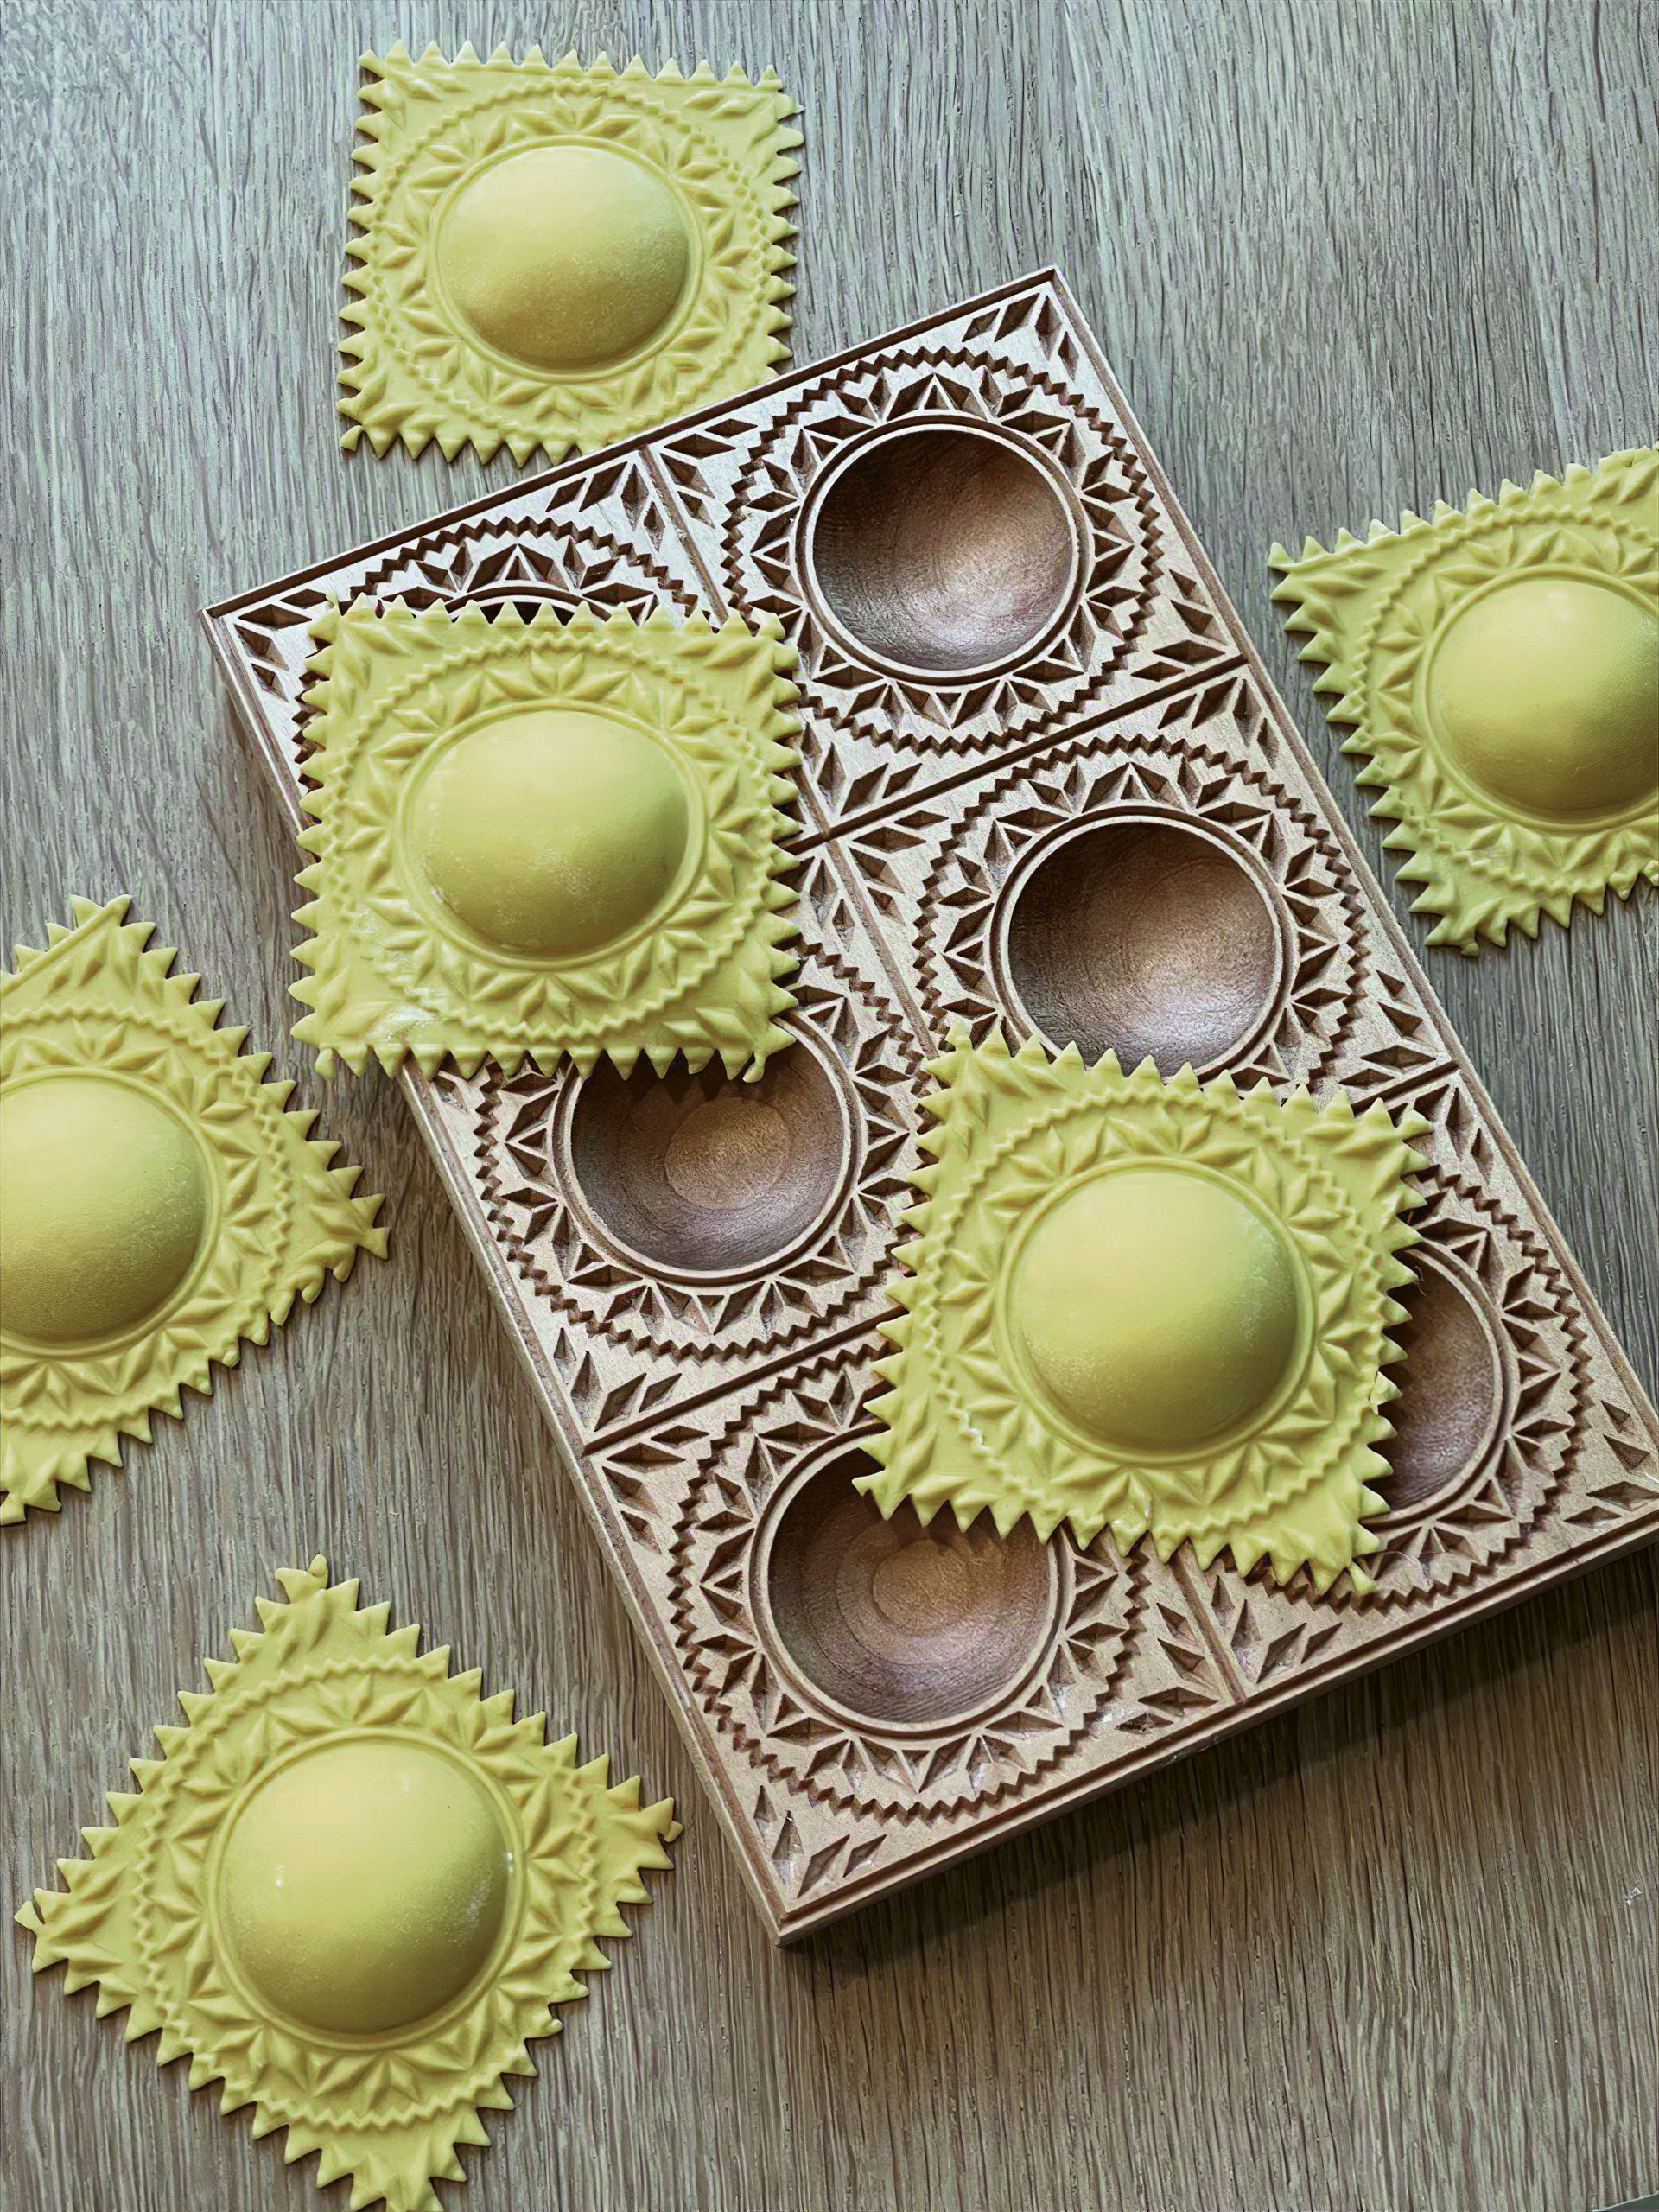 From Wood to Plate: The Art of Ukrainian Pasta